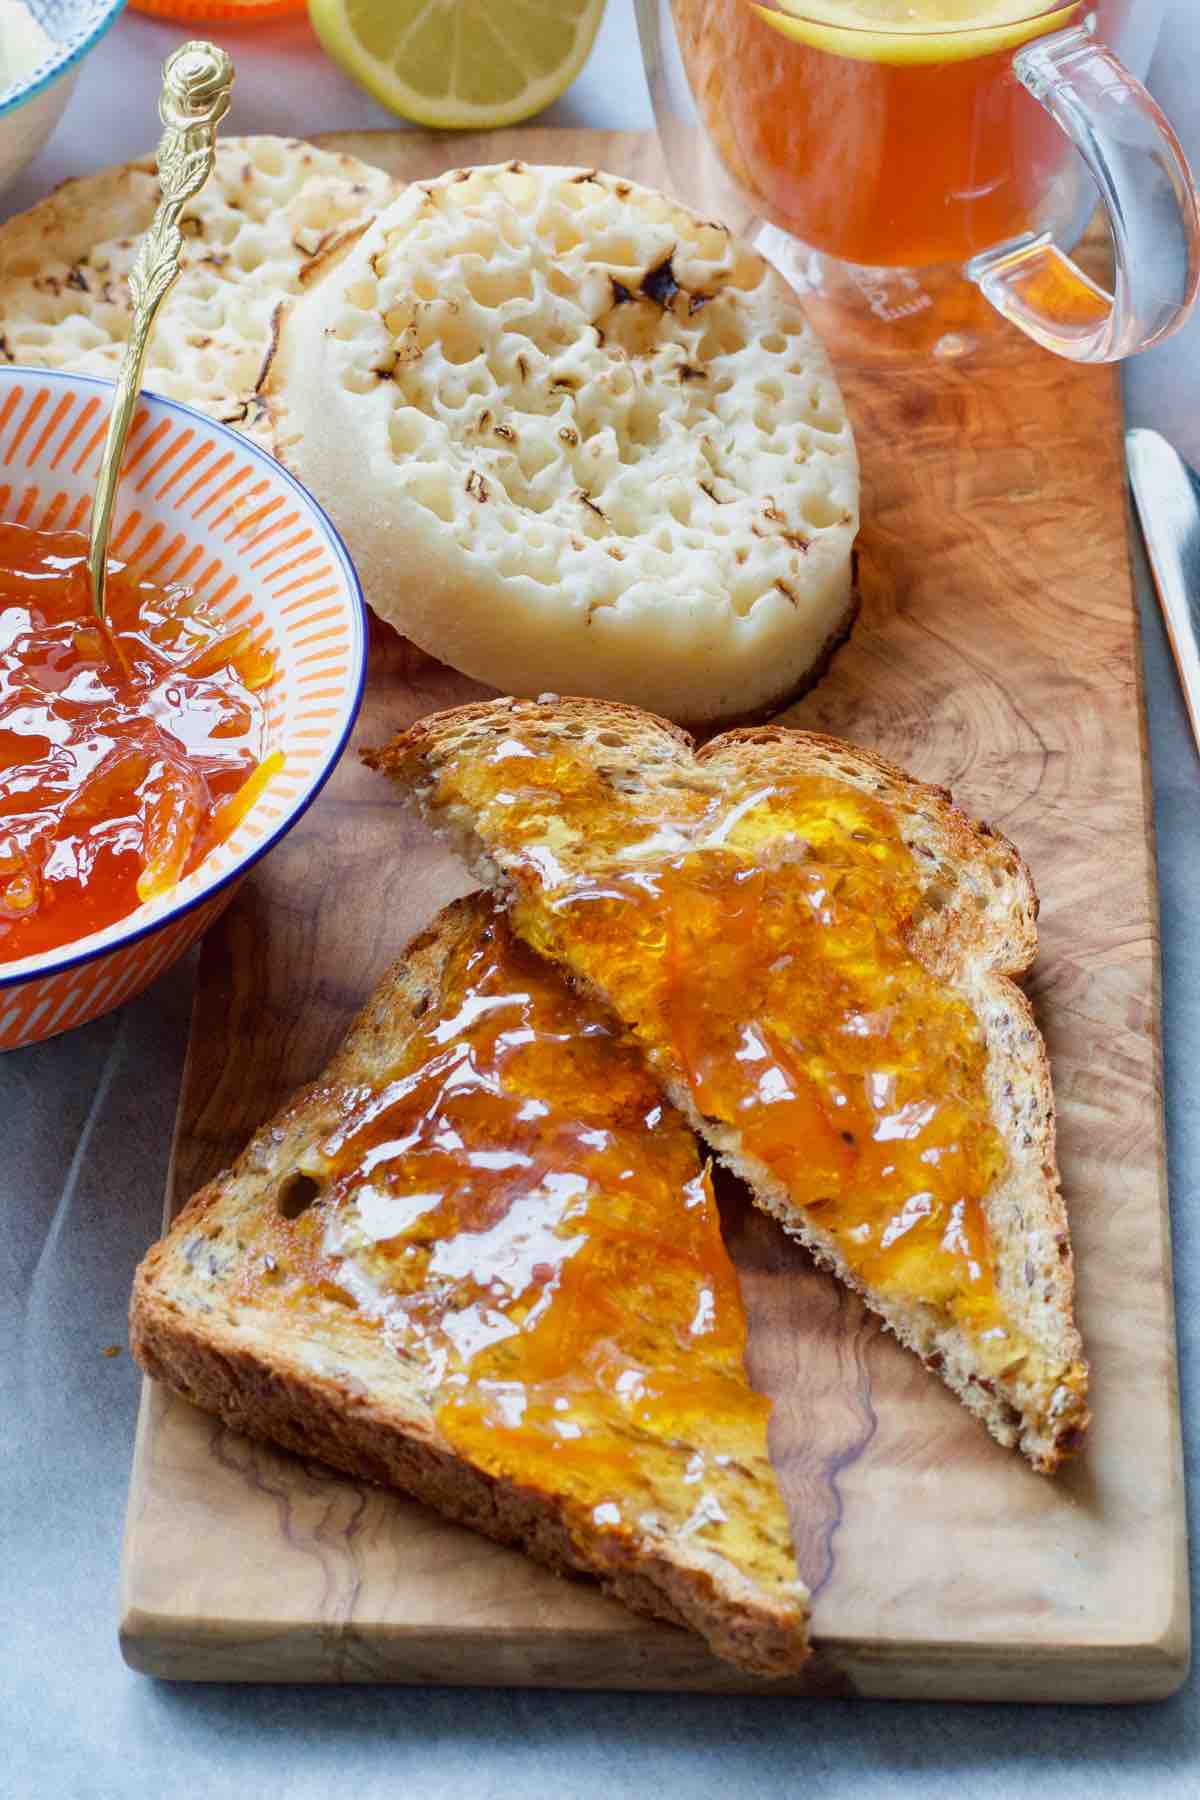 Two pieces of toast with marmalade.